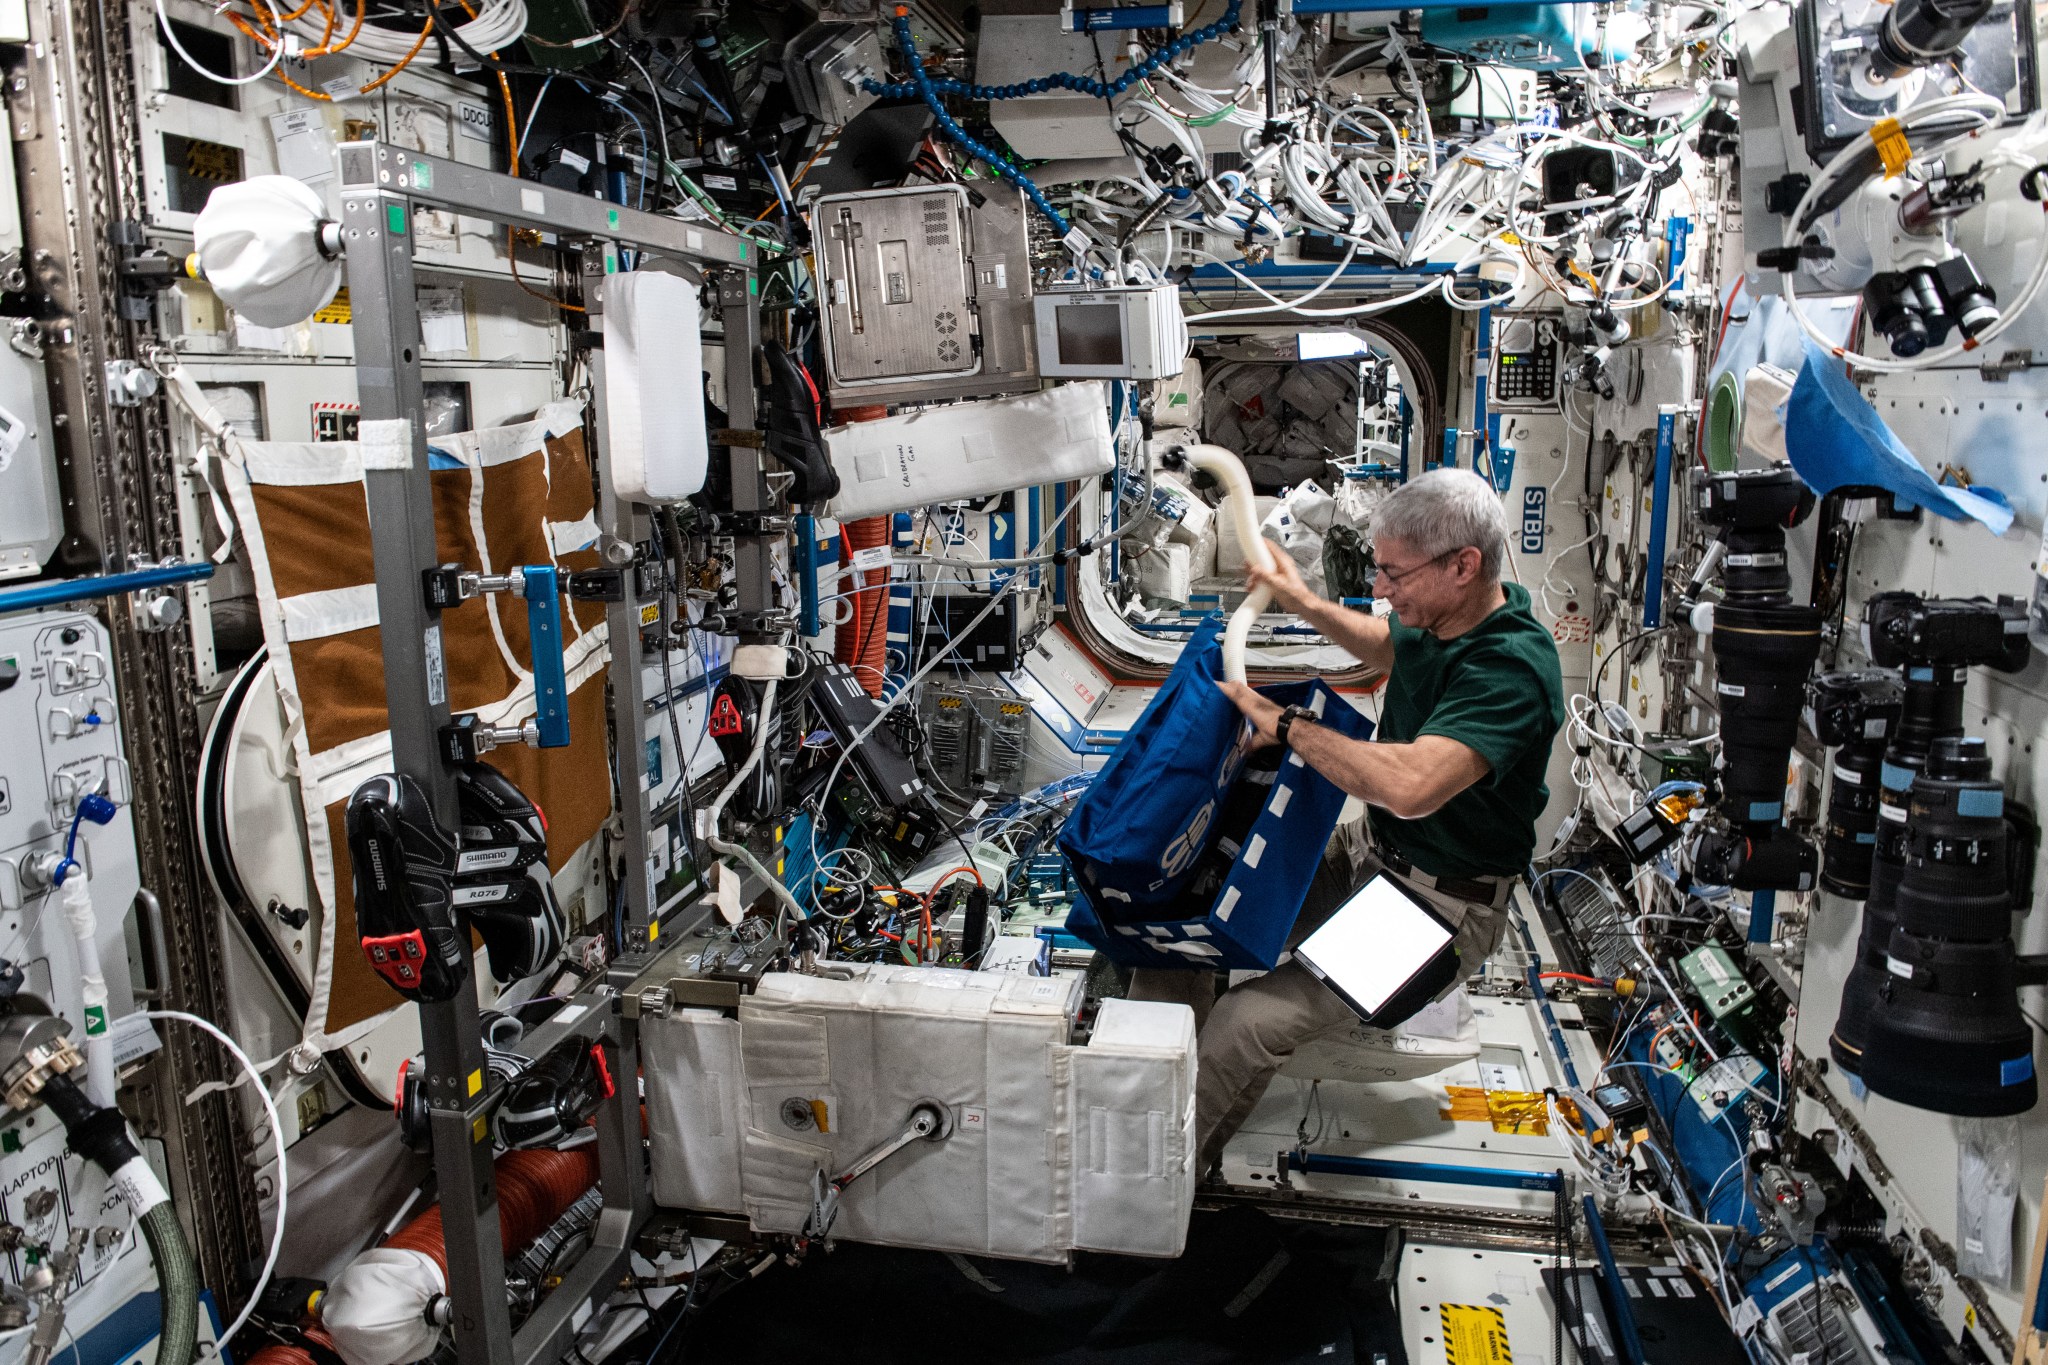 astronaut sets up the International Space Station's exercise bicycle